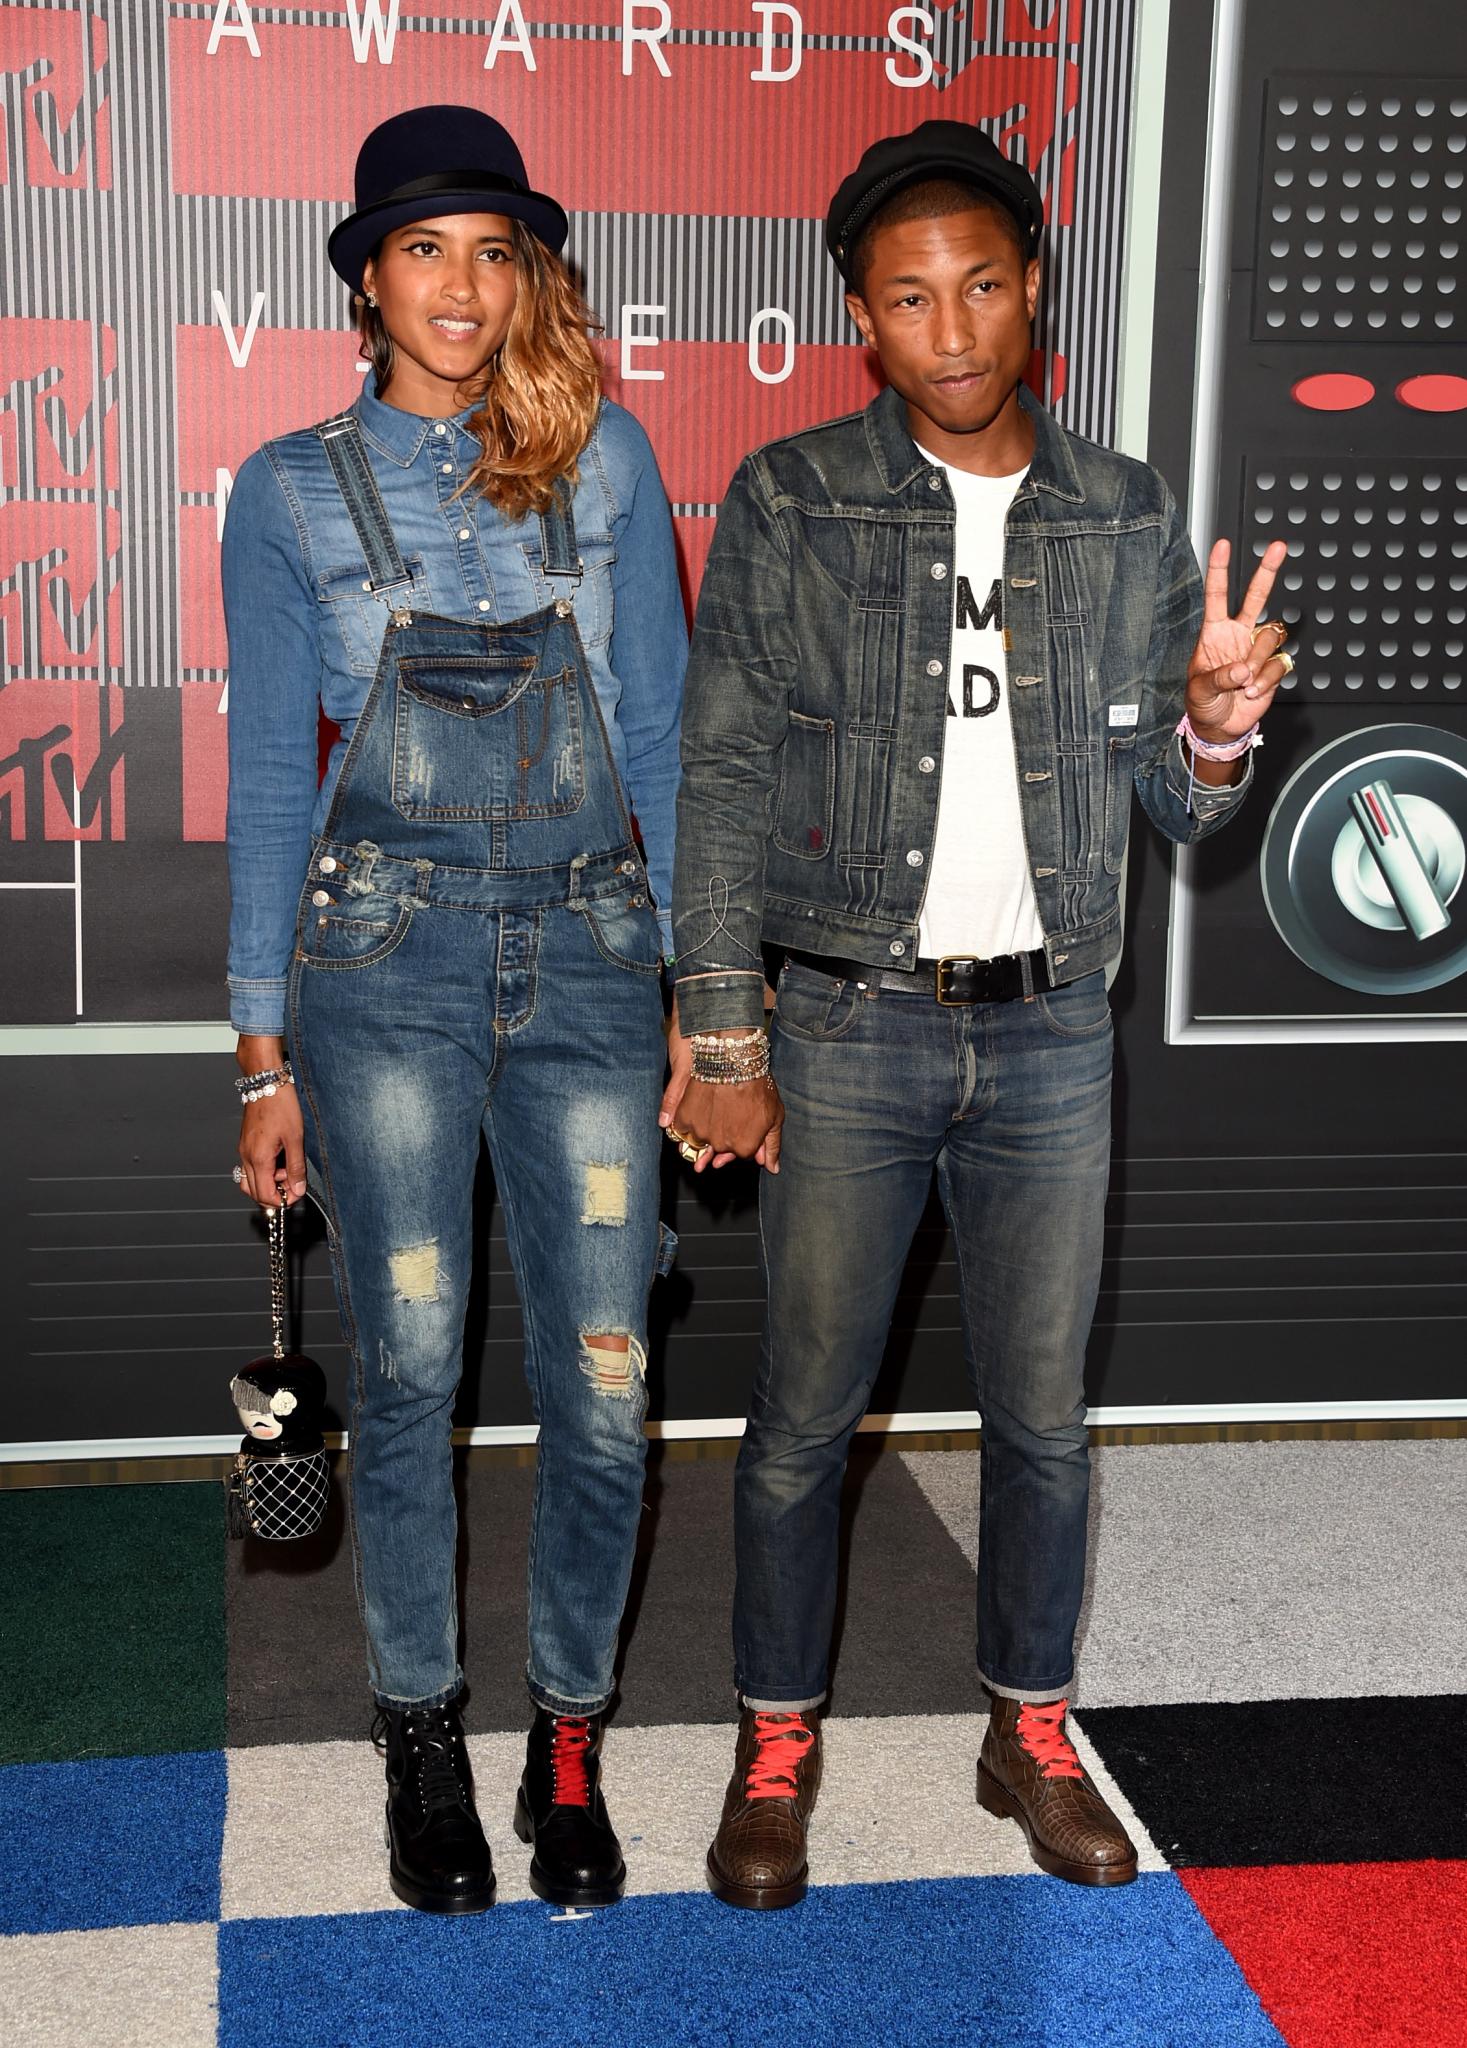 VMA Style Moments That Stole the Show